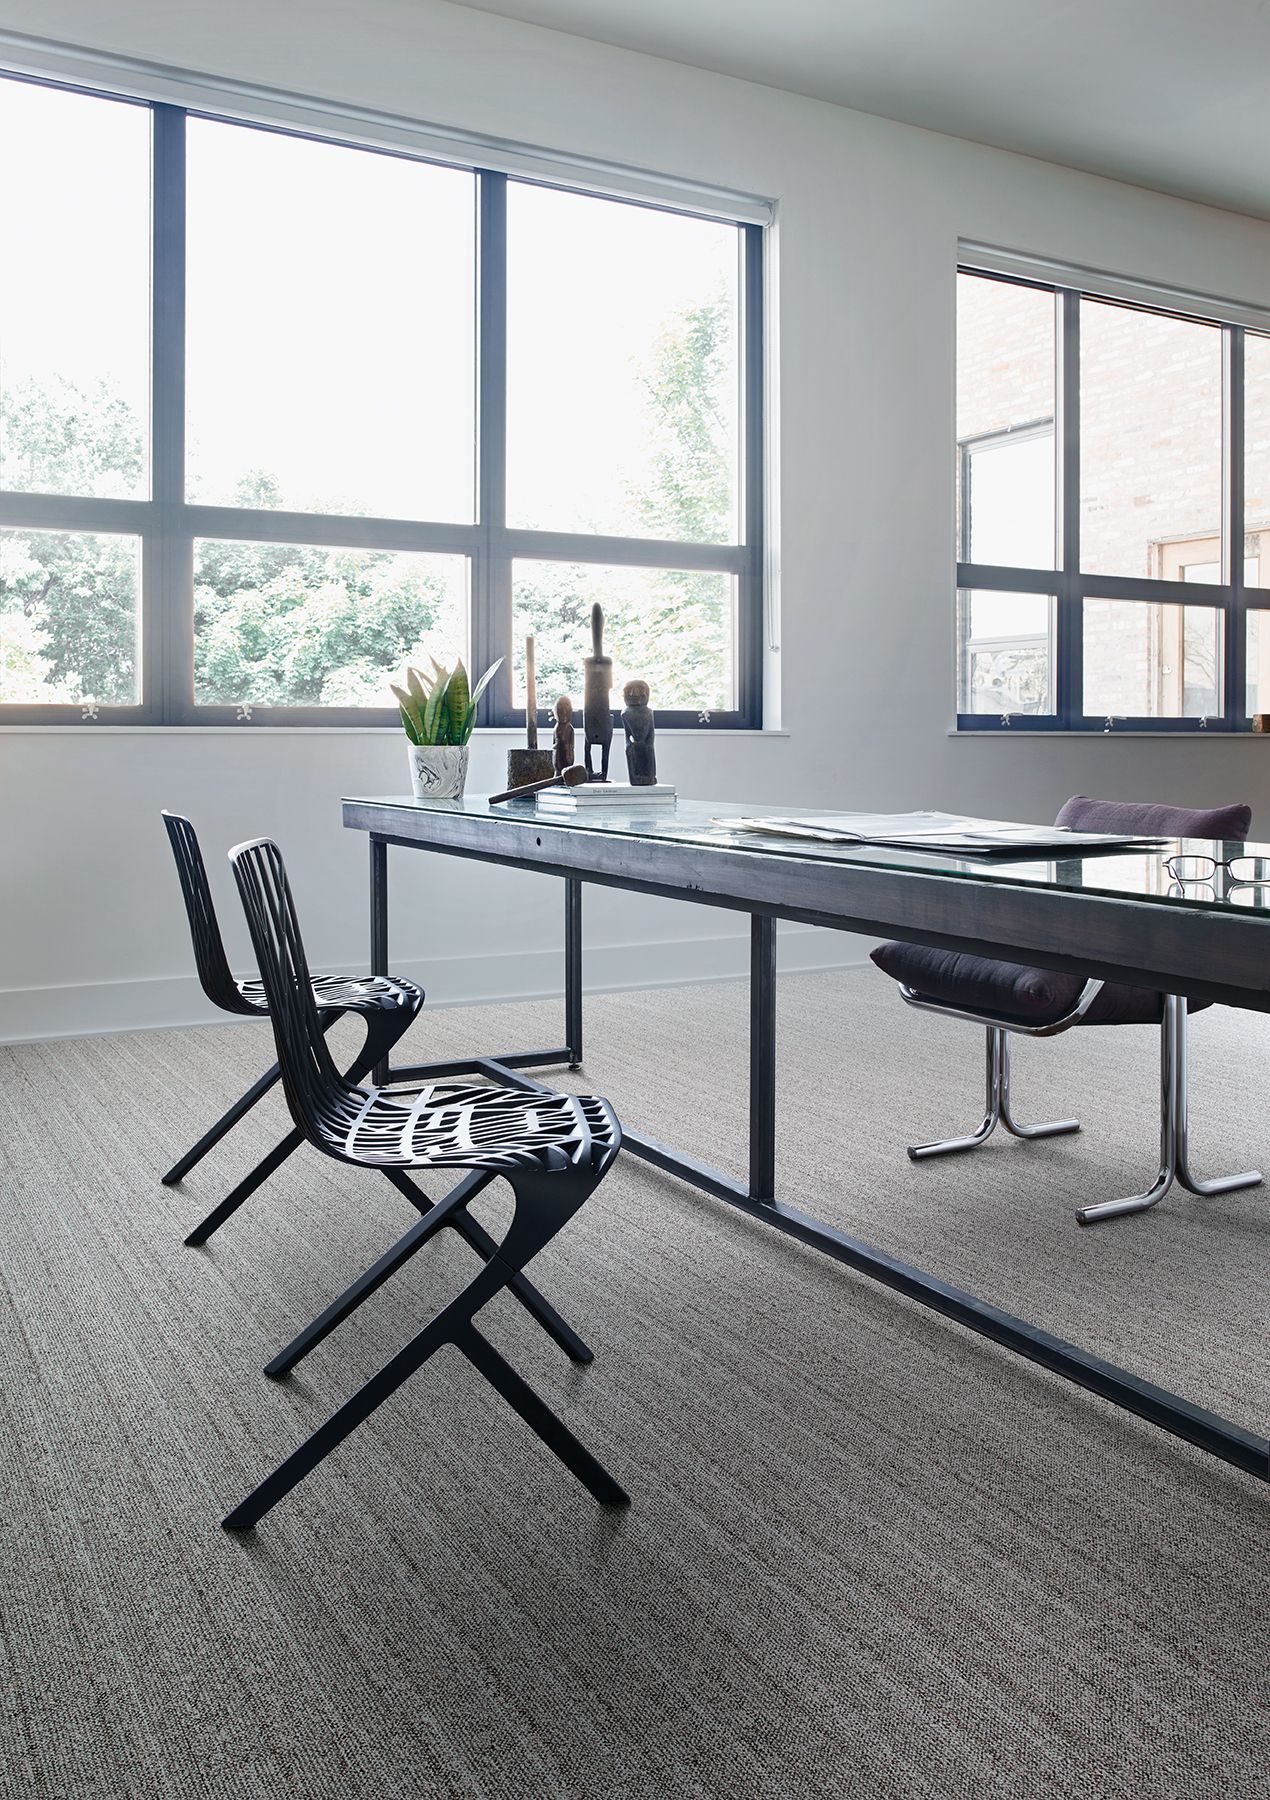 Interface WW860 plank carpet tile in work area with table and chairs número de imagen 5